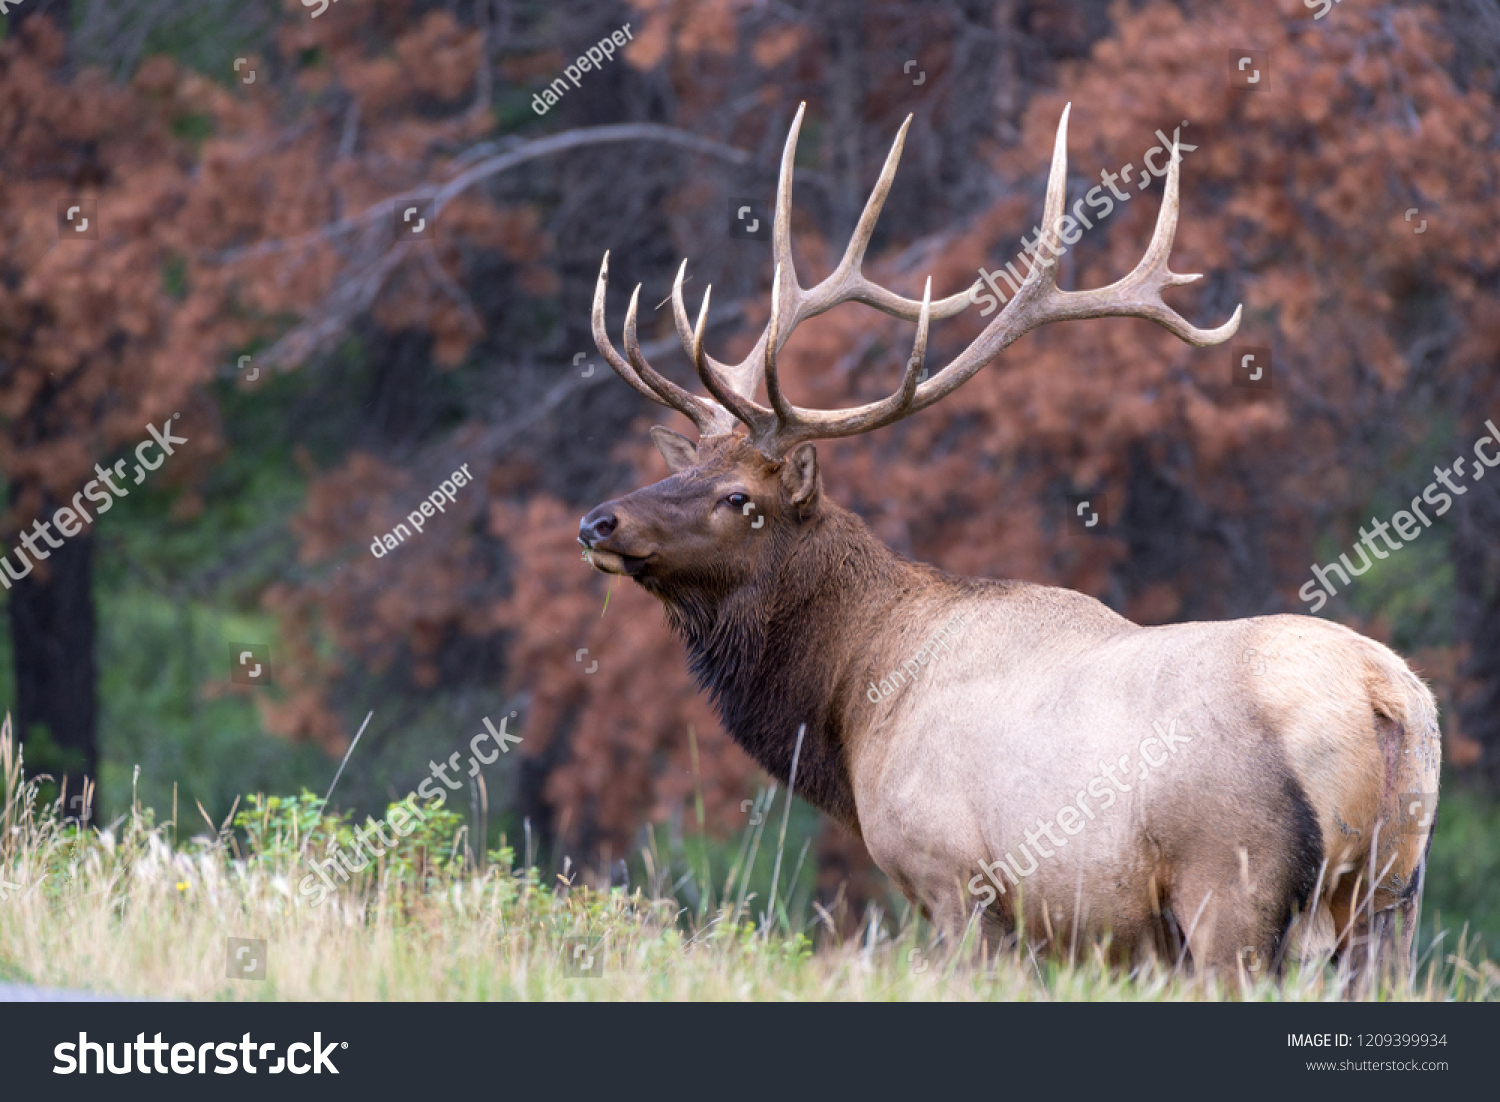 A very large bull elk standing over the edge of a hill in front of beetle killed pine trees #1209399934